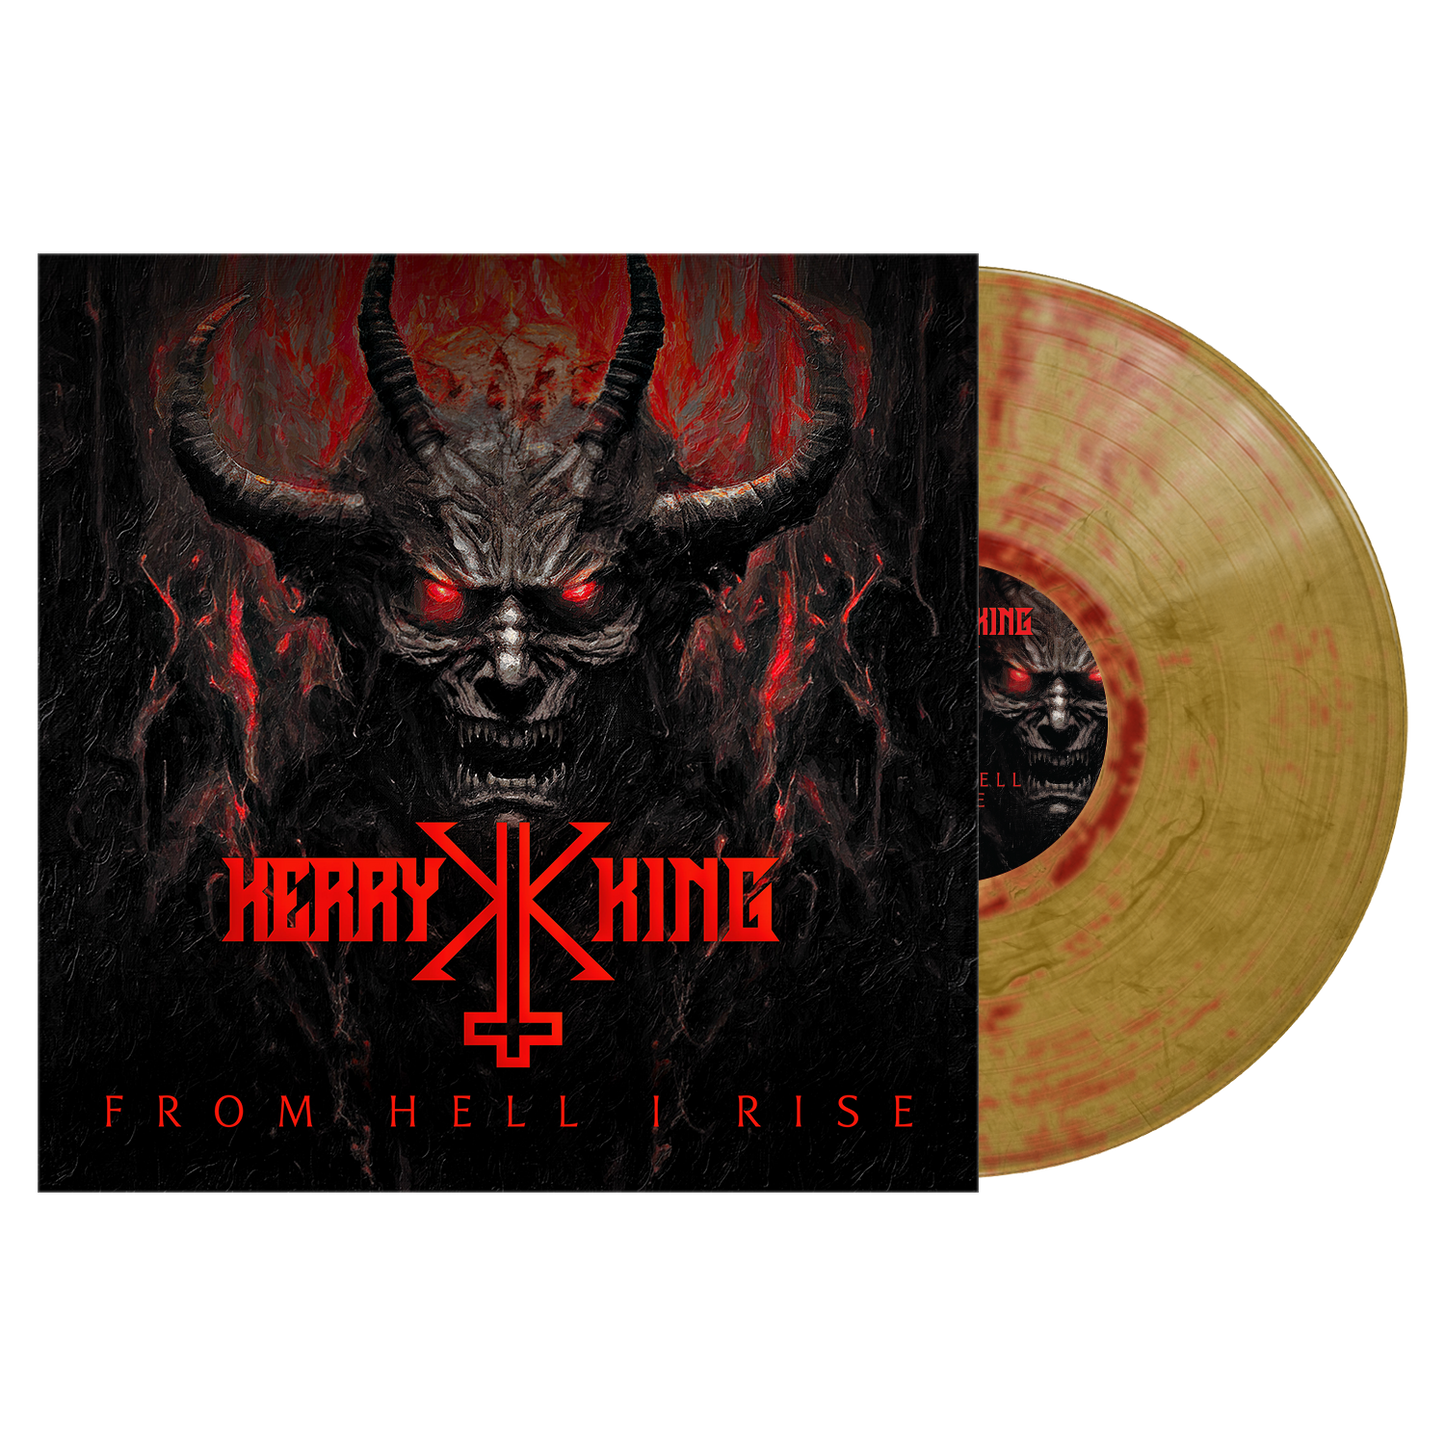 From Hell I Rise - Gold, Red Marble 1 LP Gatefold Limited Edition